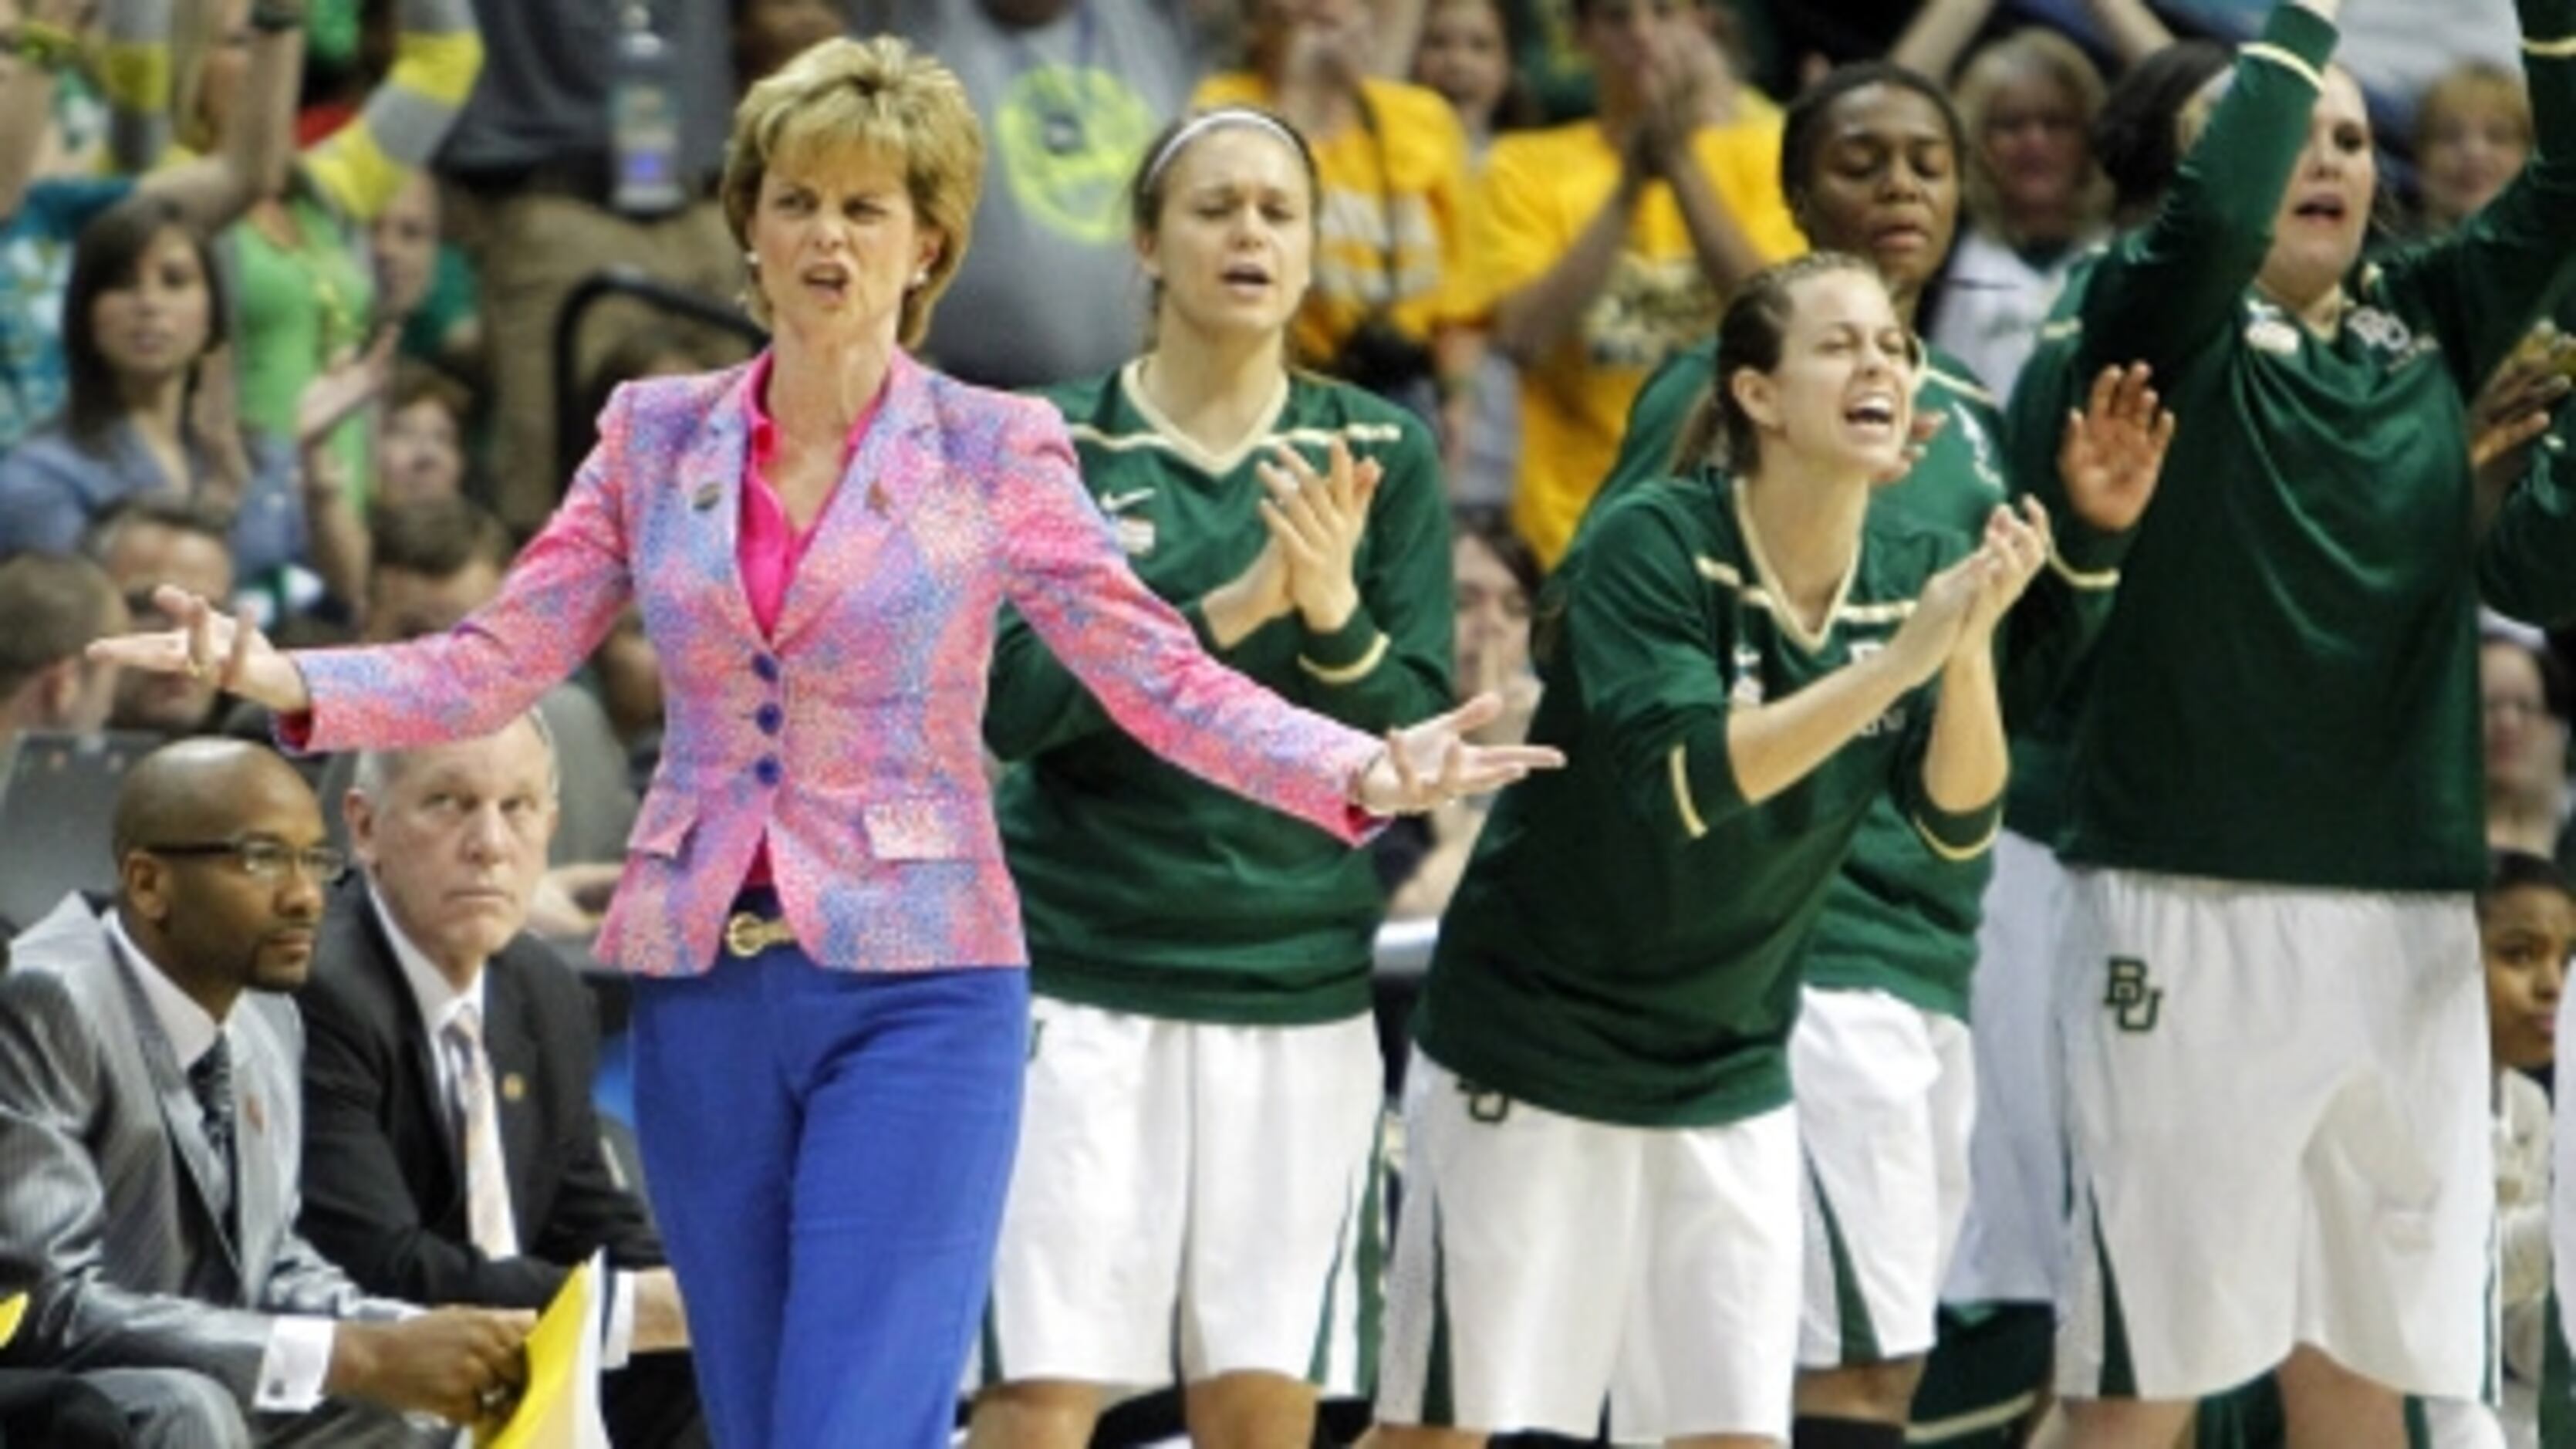 Take a look at Kim Mulkey's best outfits this season